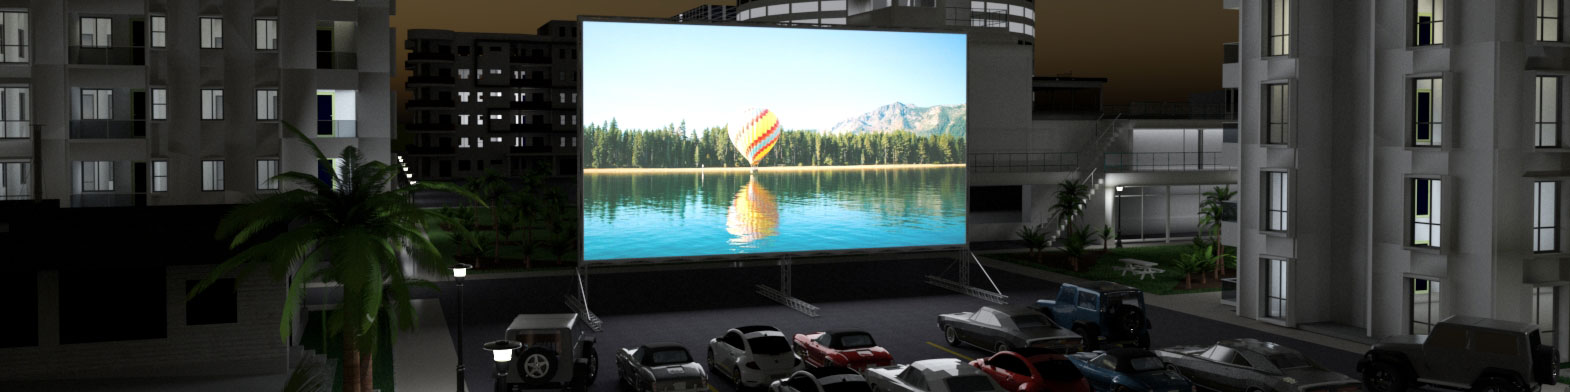 A Drive-In Projection Screen Made Of Stretch Fabric